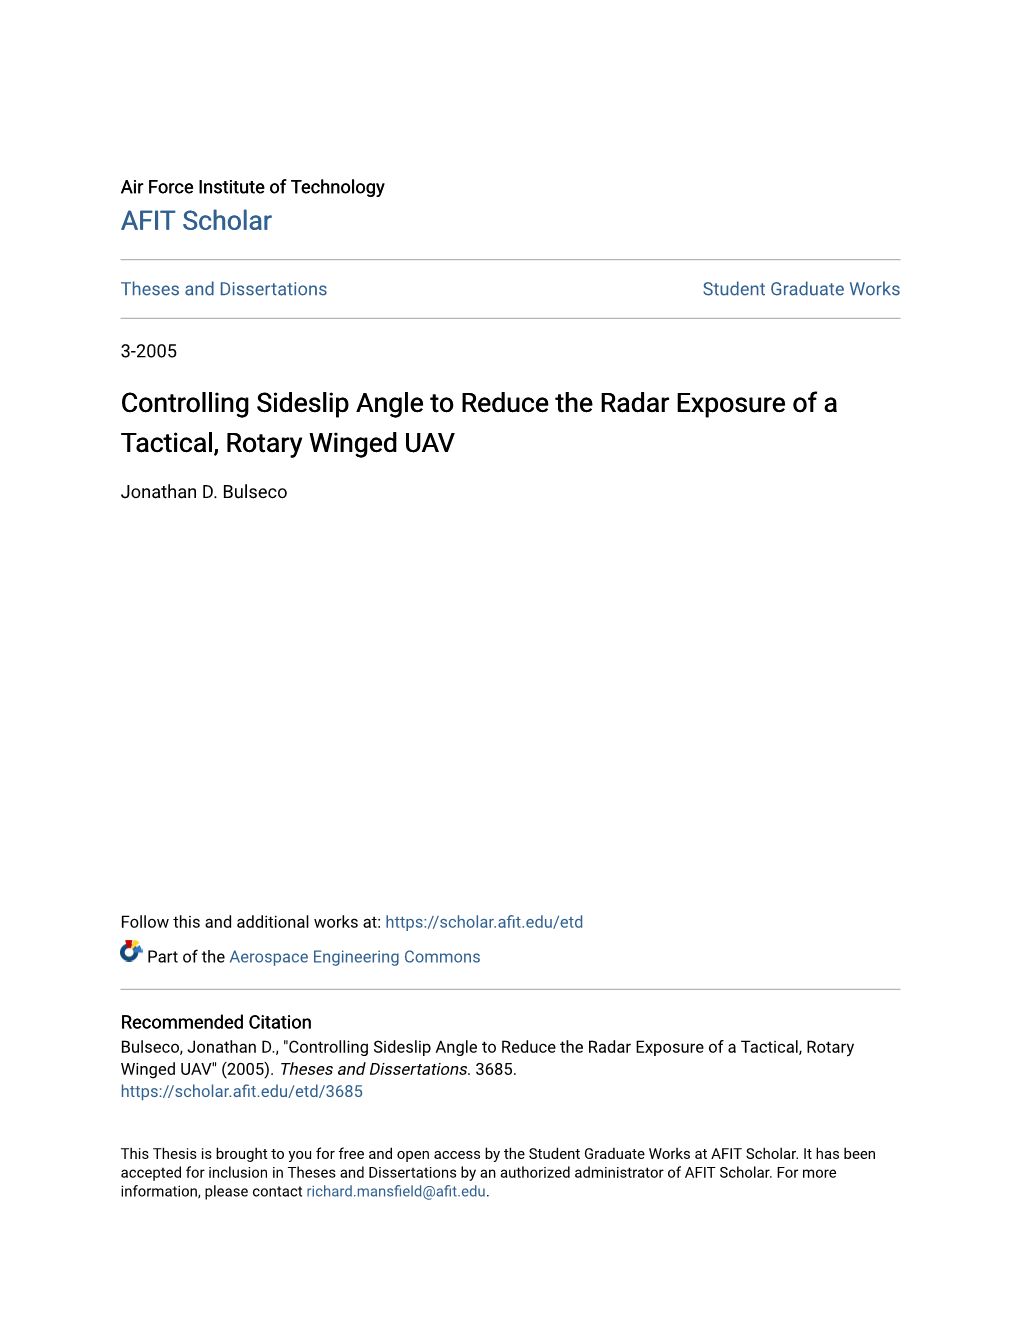 Controlling Sideslip Angle to Reduce the Radar Exposure of a Tactical, Rotary Winged UAV